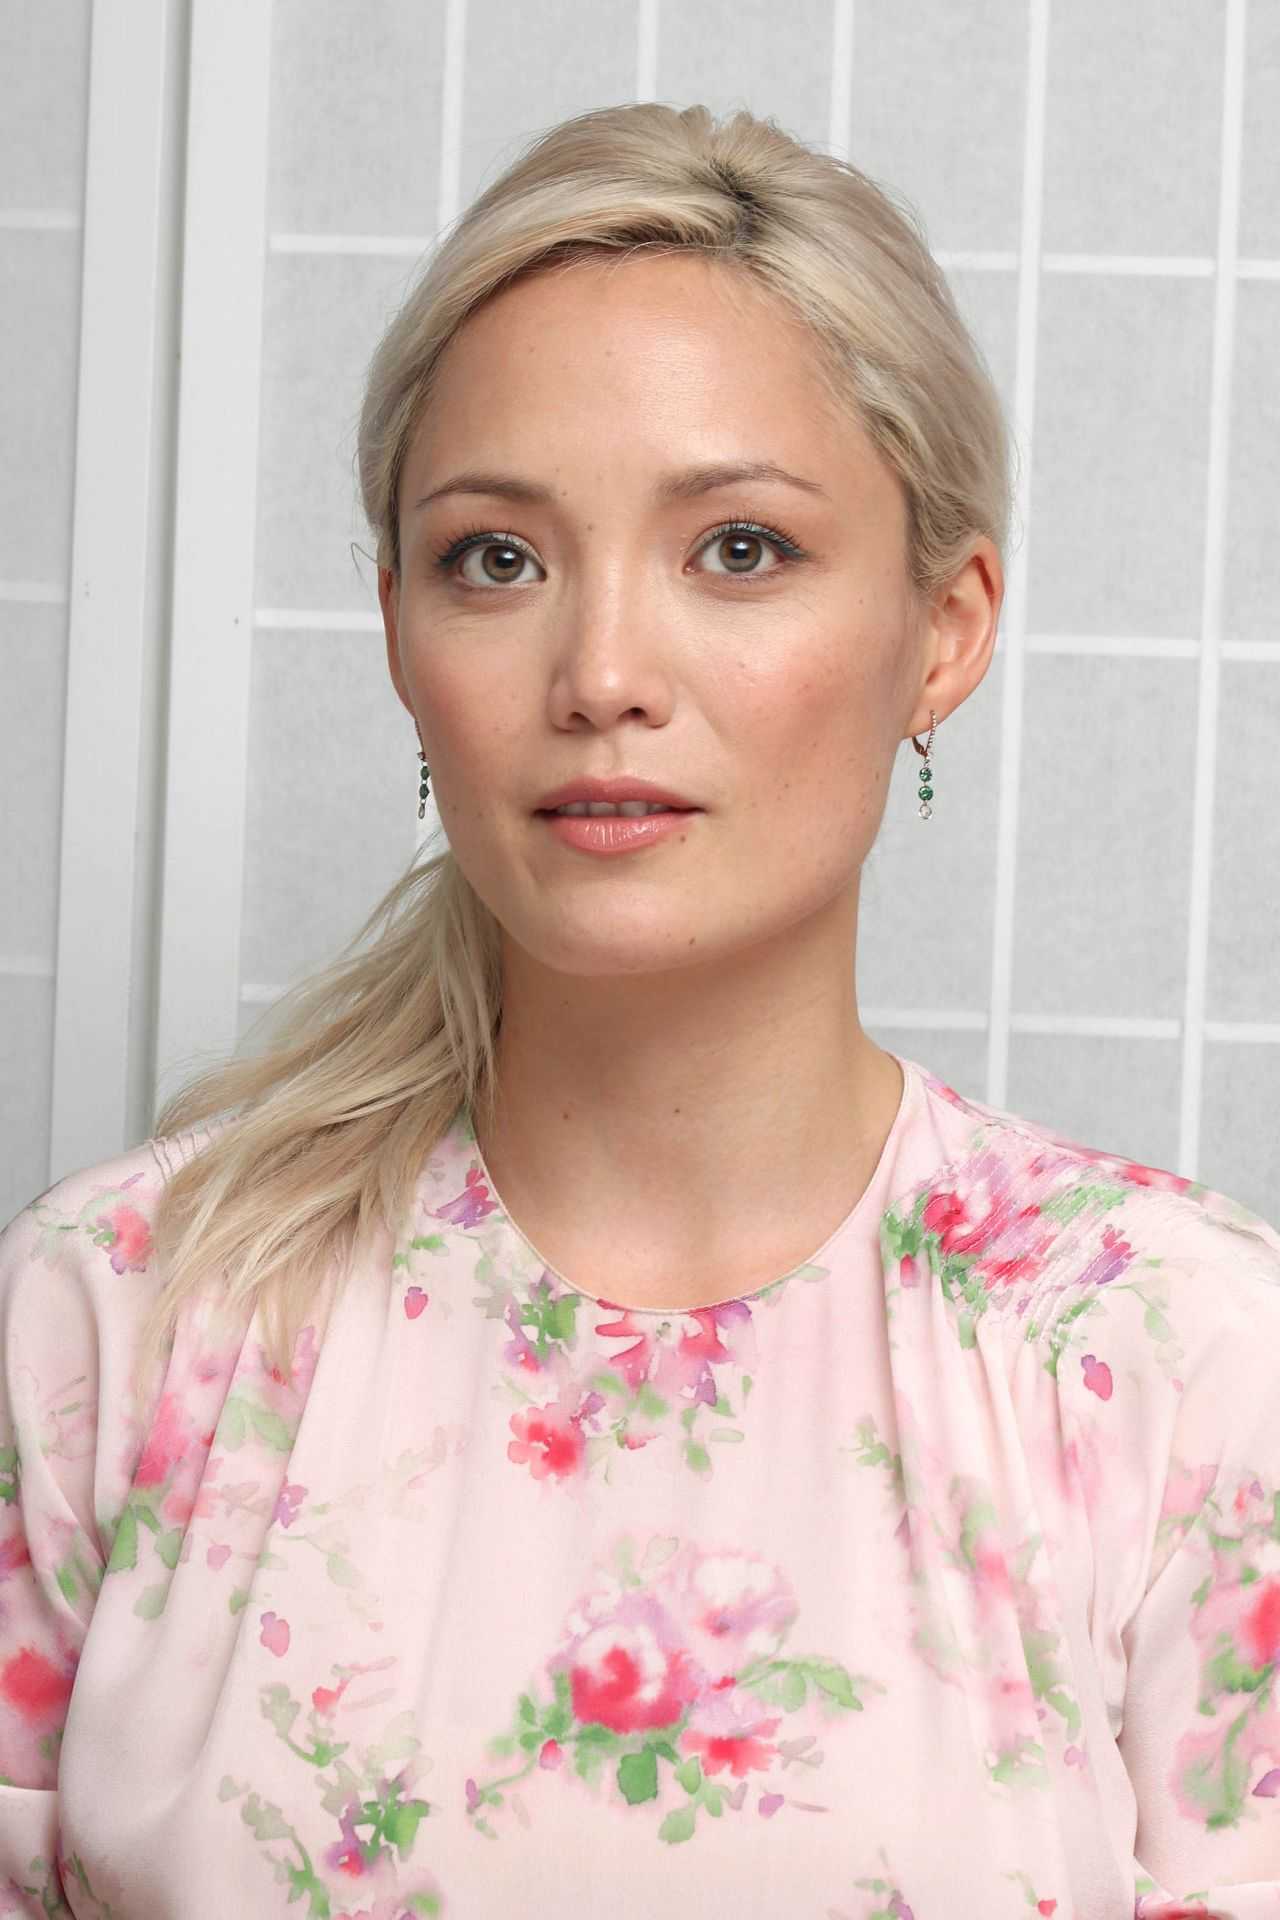 70+ Hot Pictures Of Pom Klementieff Who Plays Mantis In Marvel Cinematic Universe 135